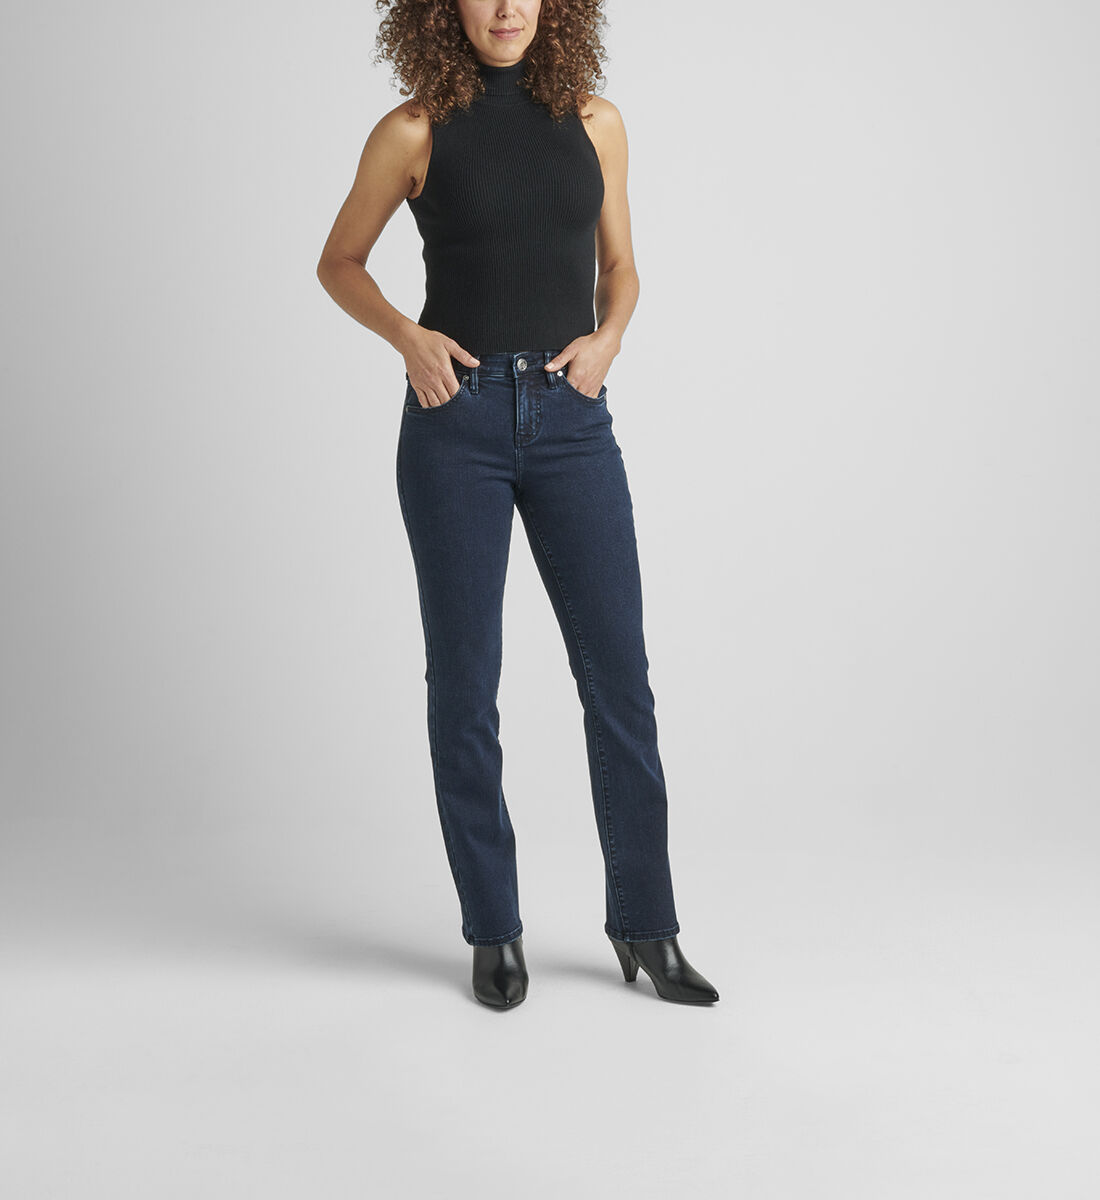 Eloise Mid Rise Bootcut Jeans Front